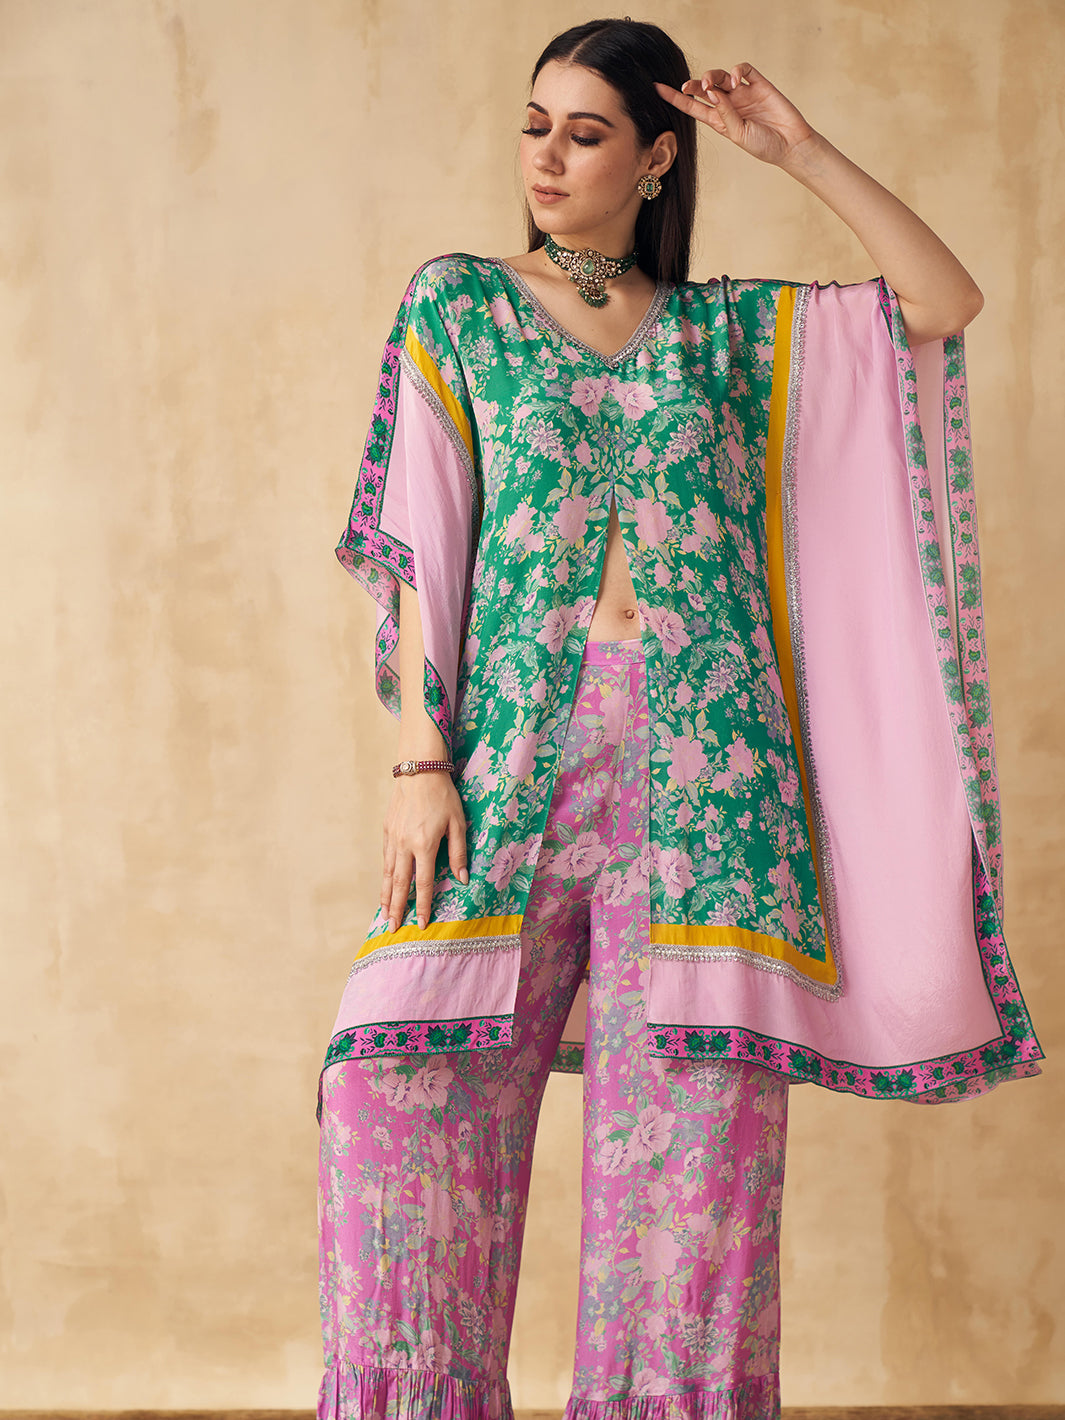 Style with Ethnic Flared Sharara Pants | Shop Now | Ajmery